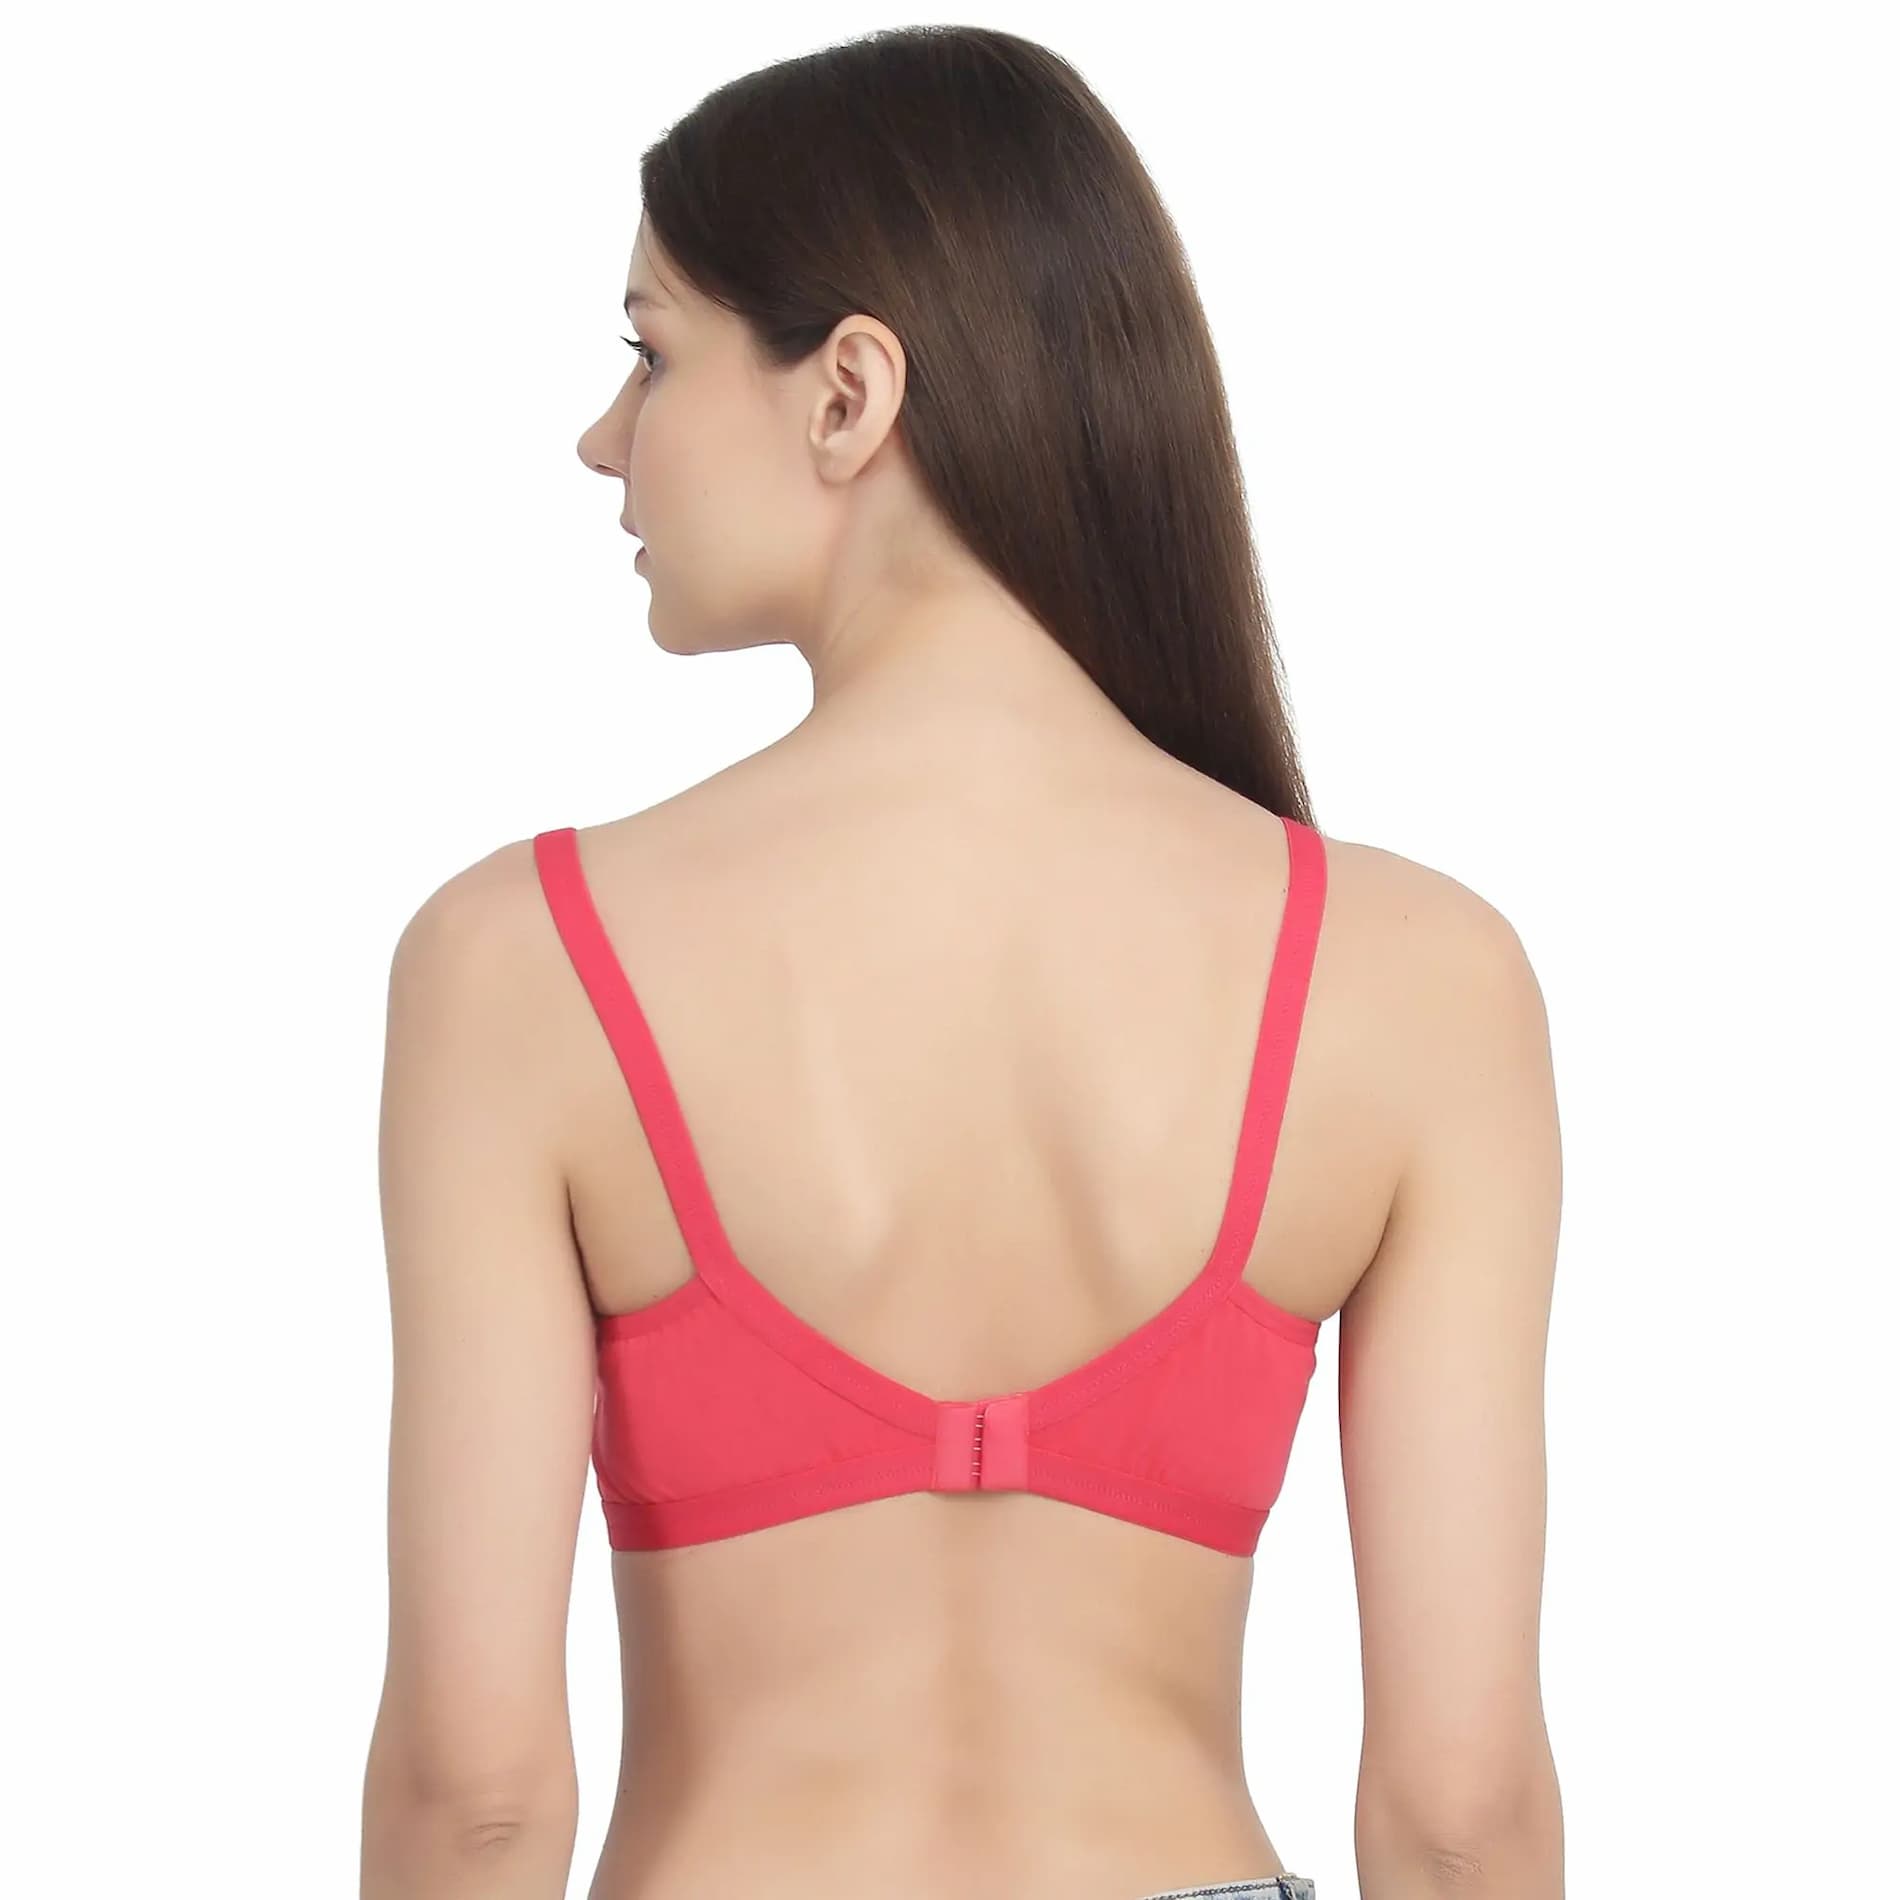 Mylo Maternity/Nursing Moulded Spacer Cup Bra Pack of 2 with free bra extender -(Coral, Navy) 40 B   